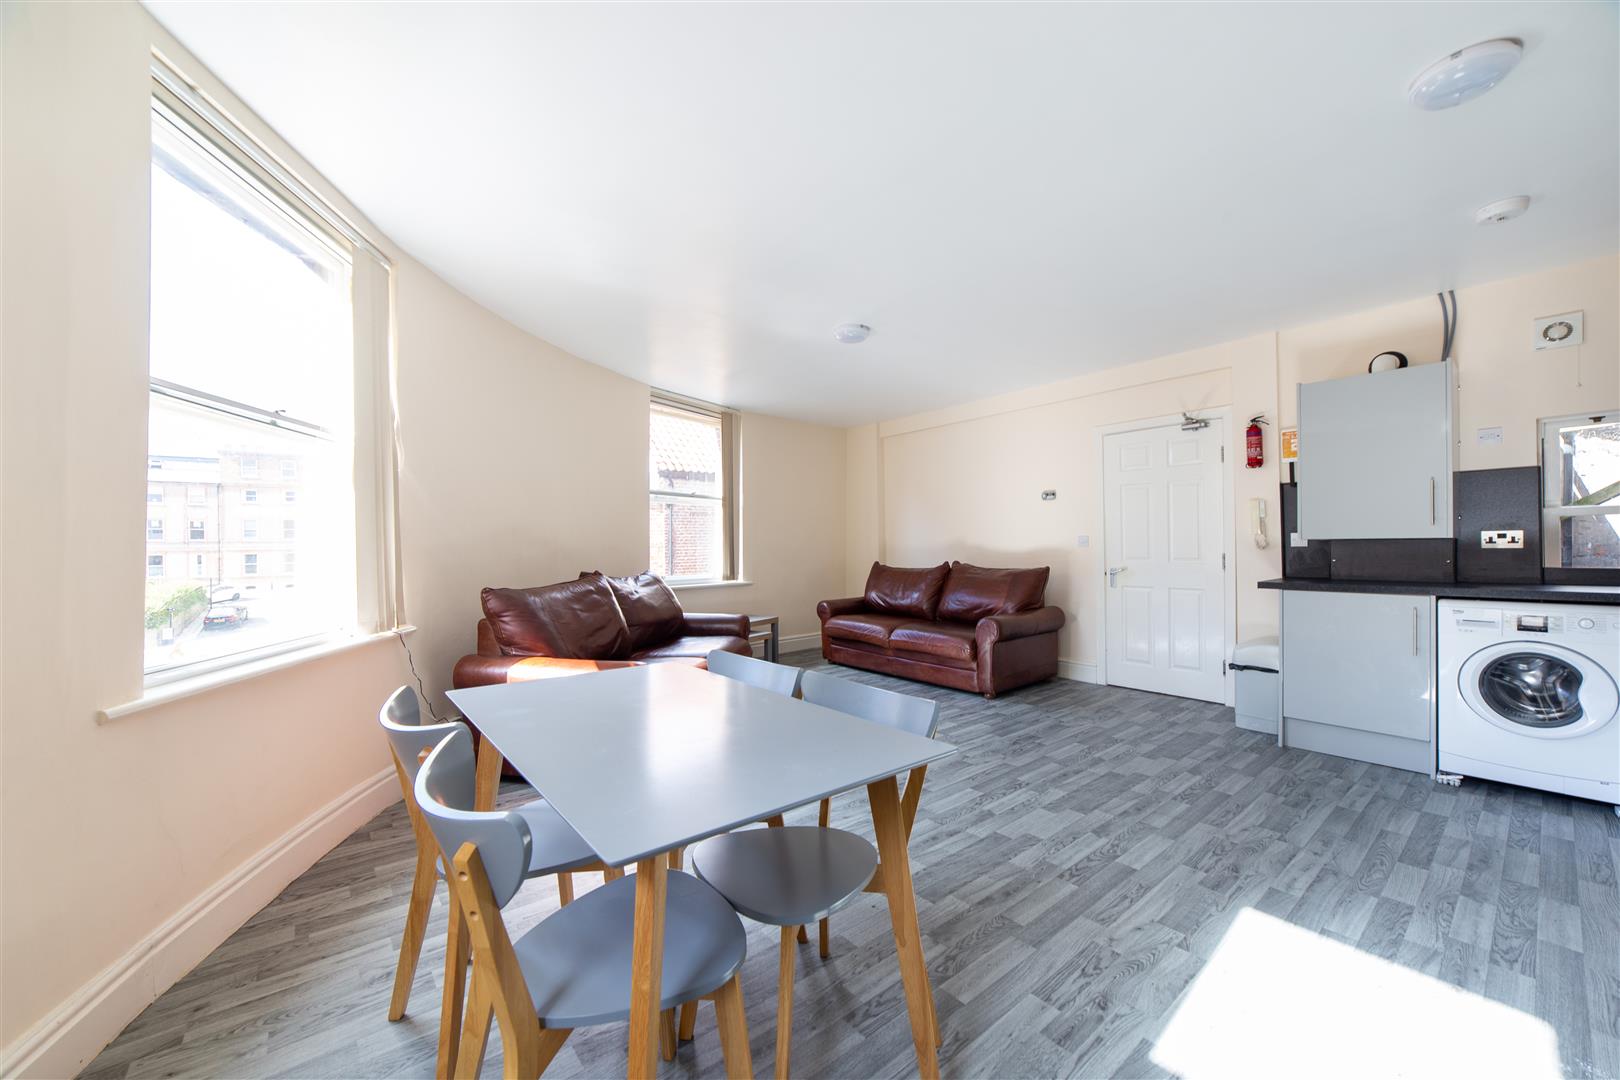 4 bed apartment to rent in Fenkle Street, Newcastle Upon Tyne 2